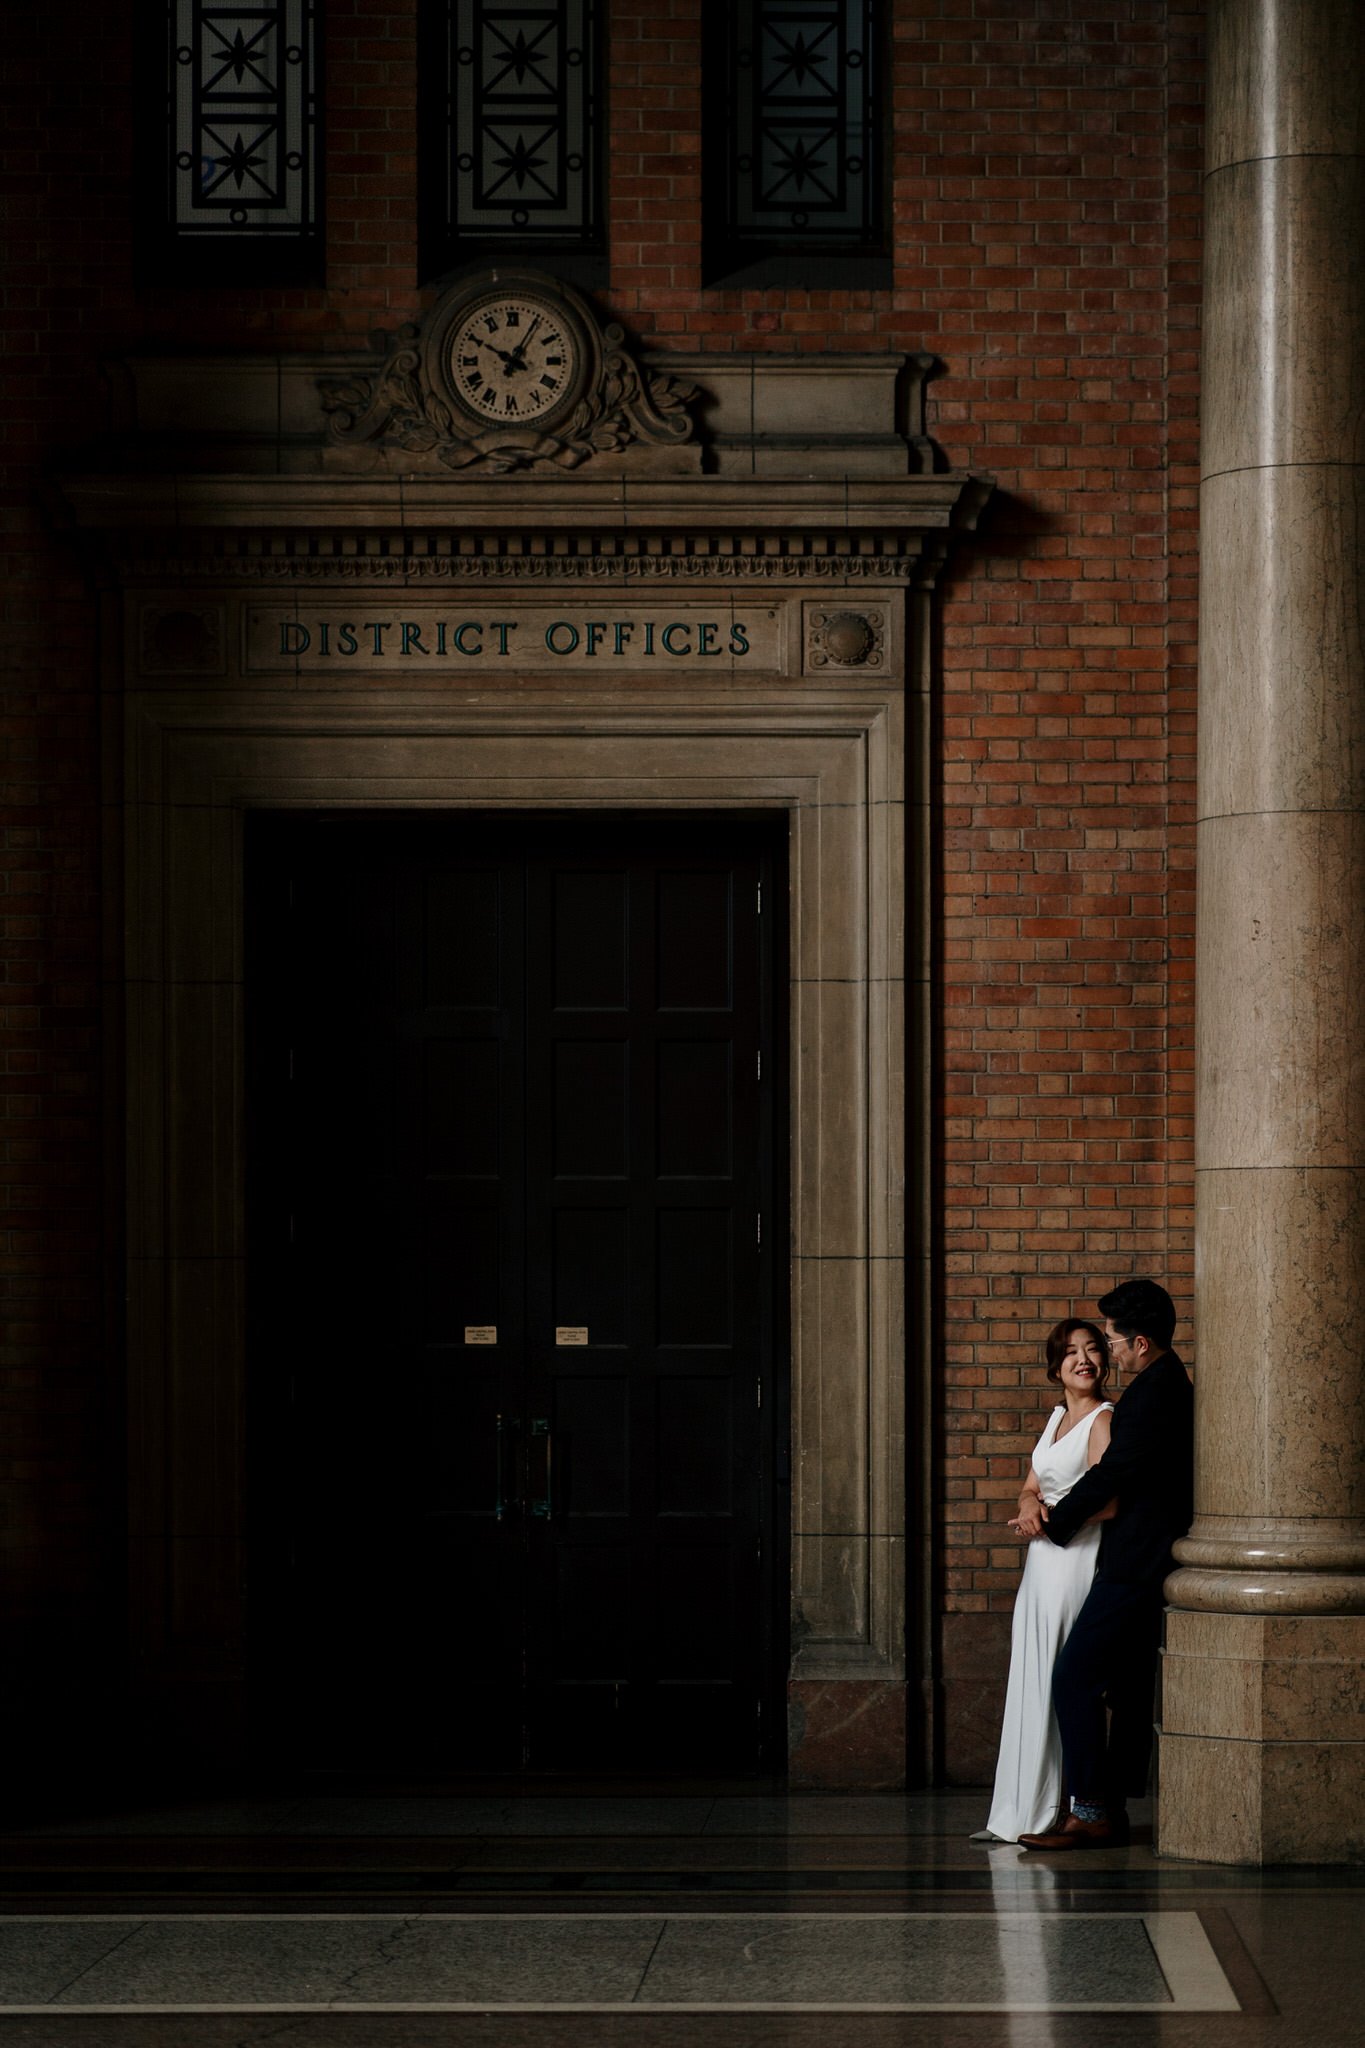 auckland-wedding-photographer-videographer-story-by-koo-koo's-jewelry-dear-white-productions-old-train-station-new-zealand-moody-historical-pre-wedding-engagement-photo (20).JPG